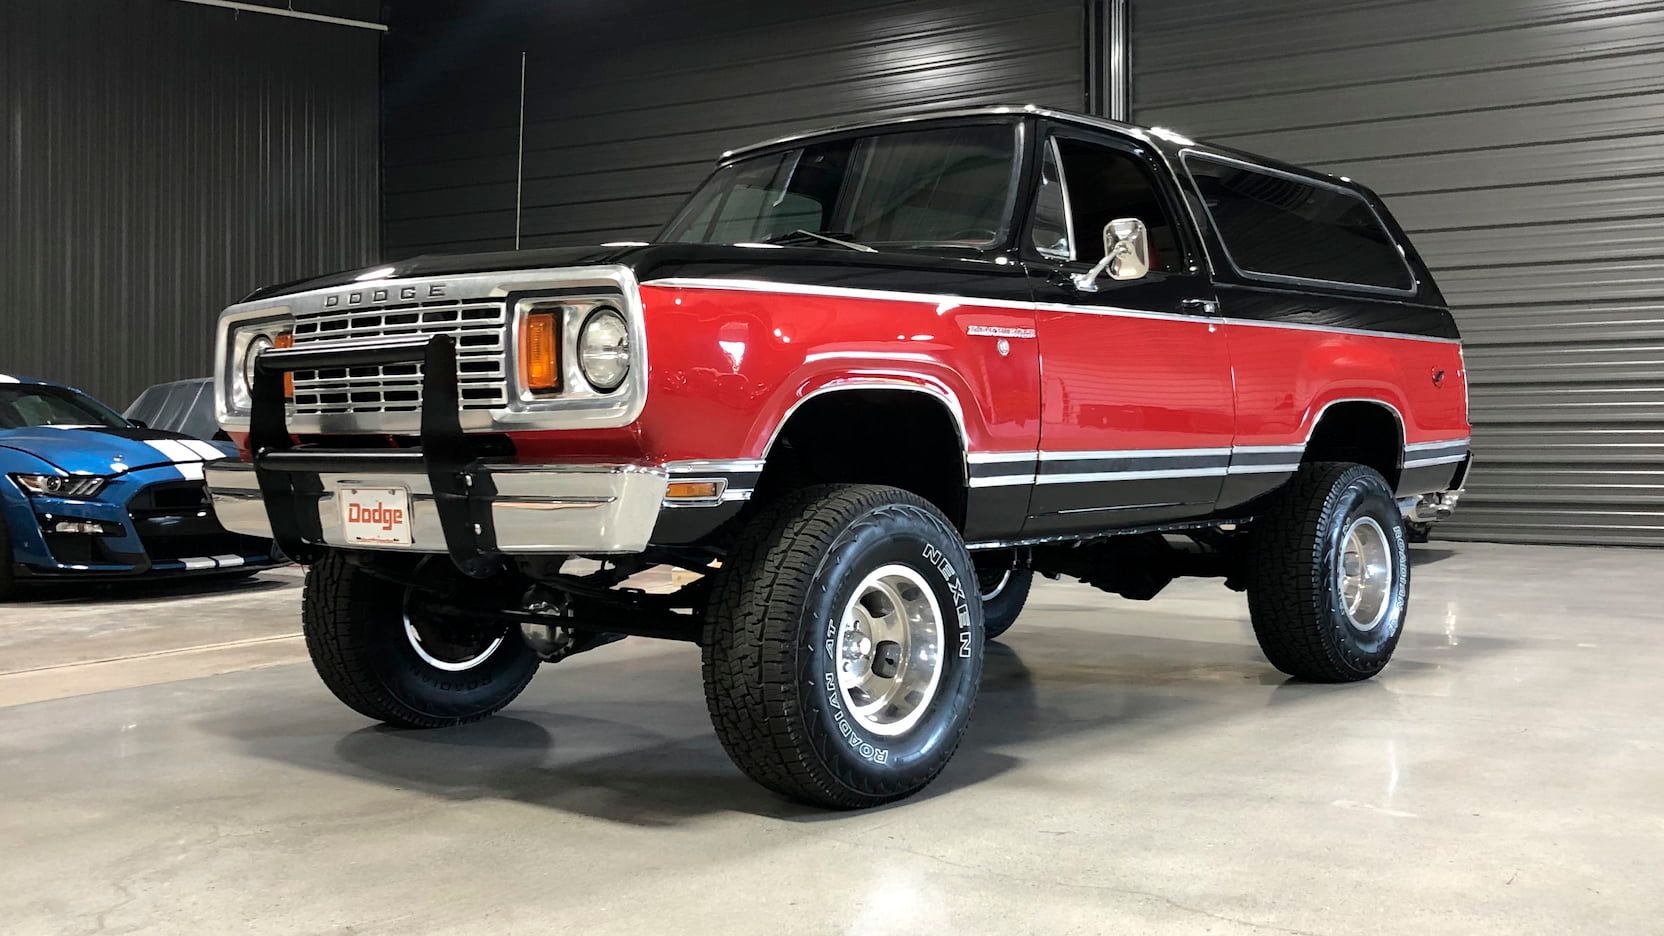 A parked 1978 Dodge Ramcharger